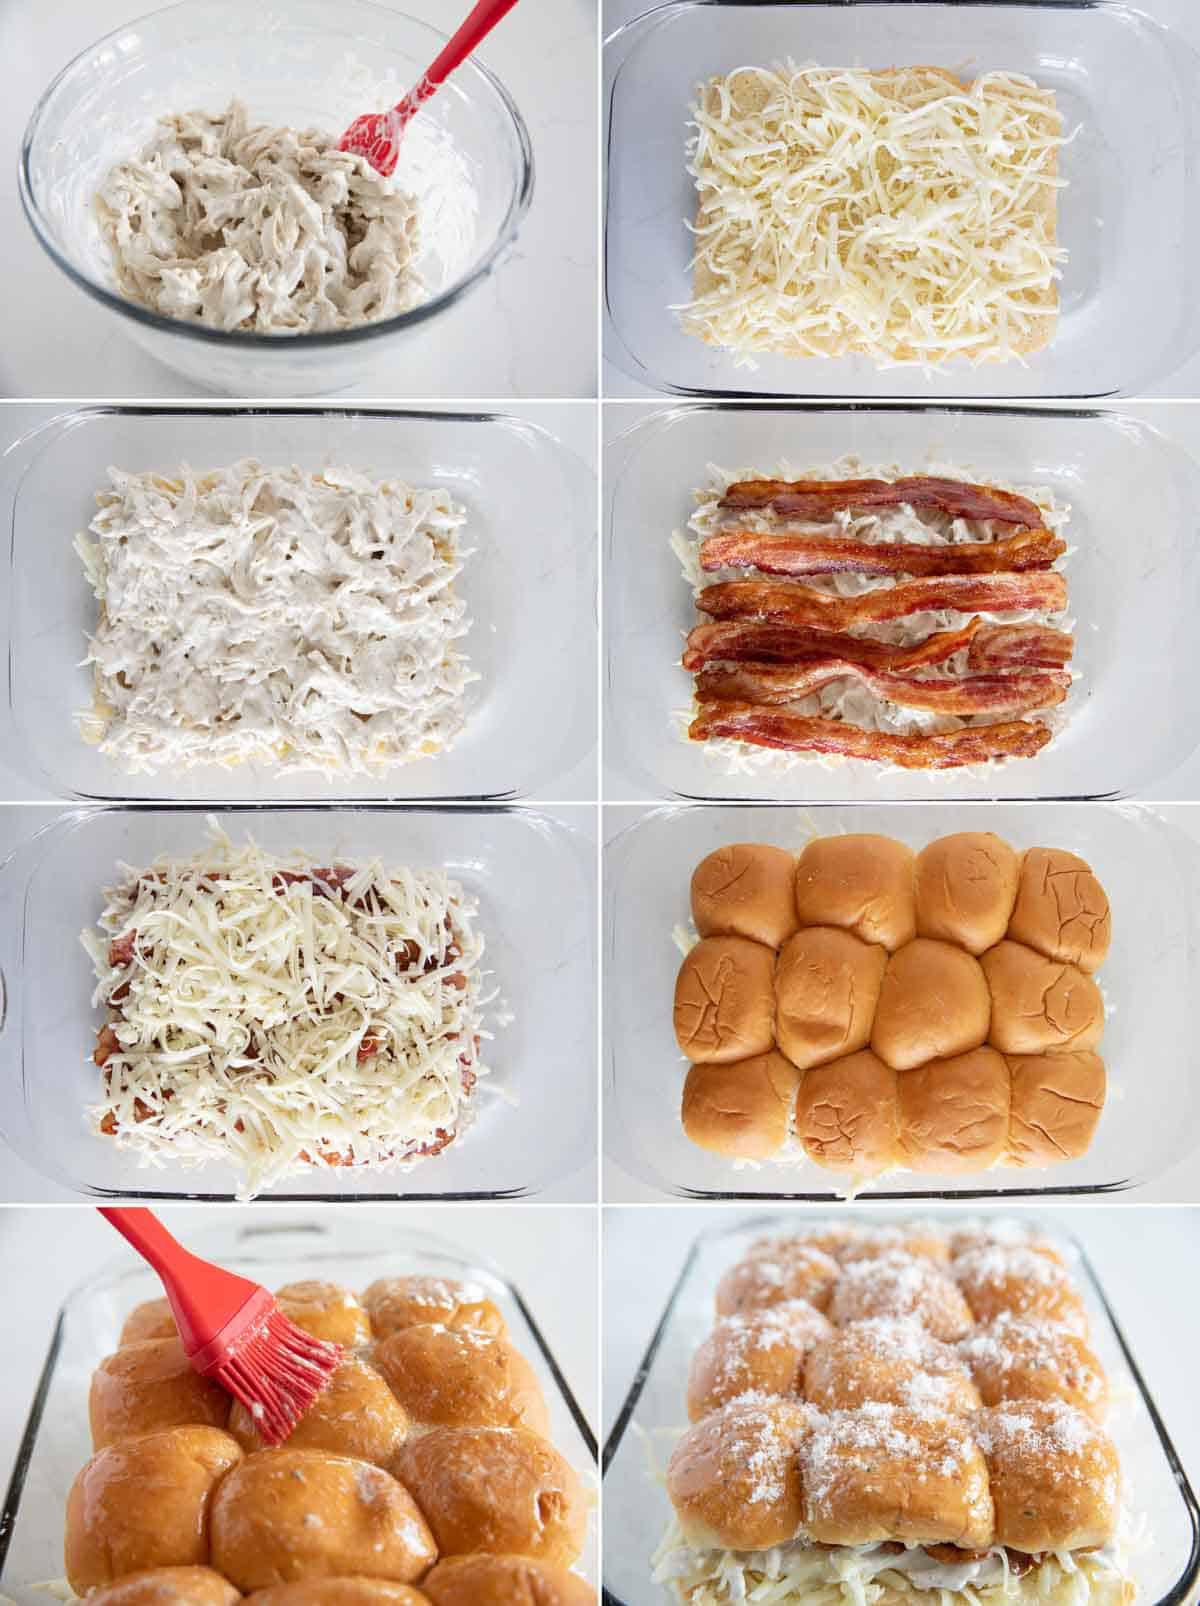 Steps to make chicken bacon ranch sliders.